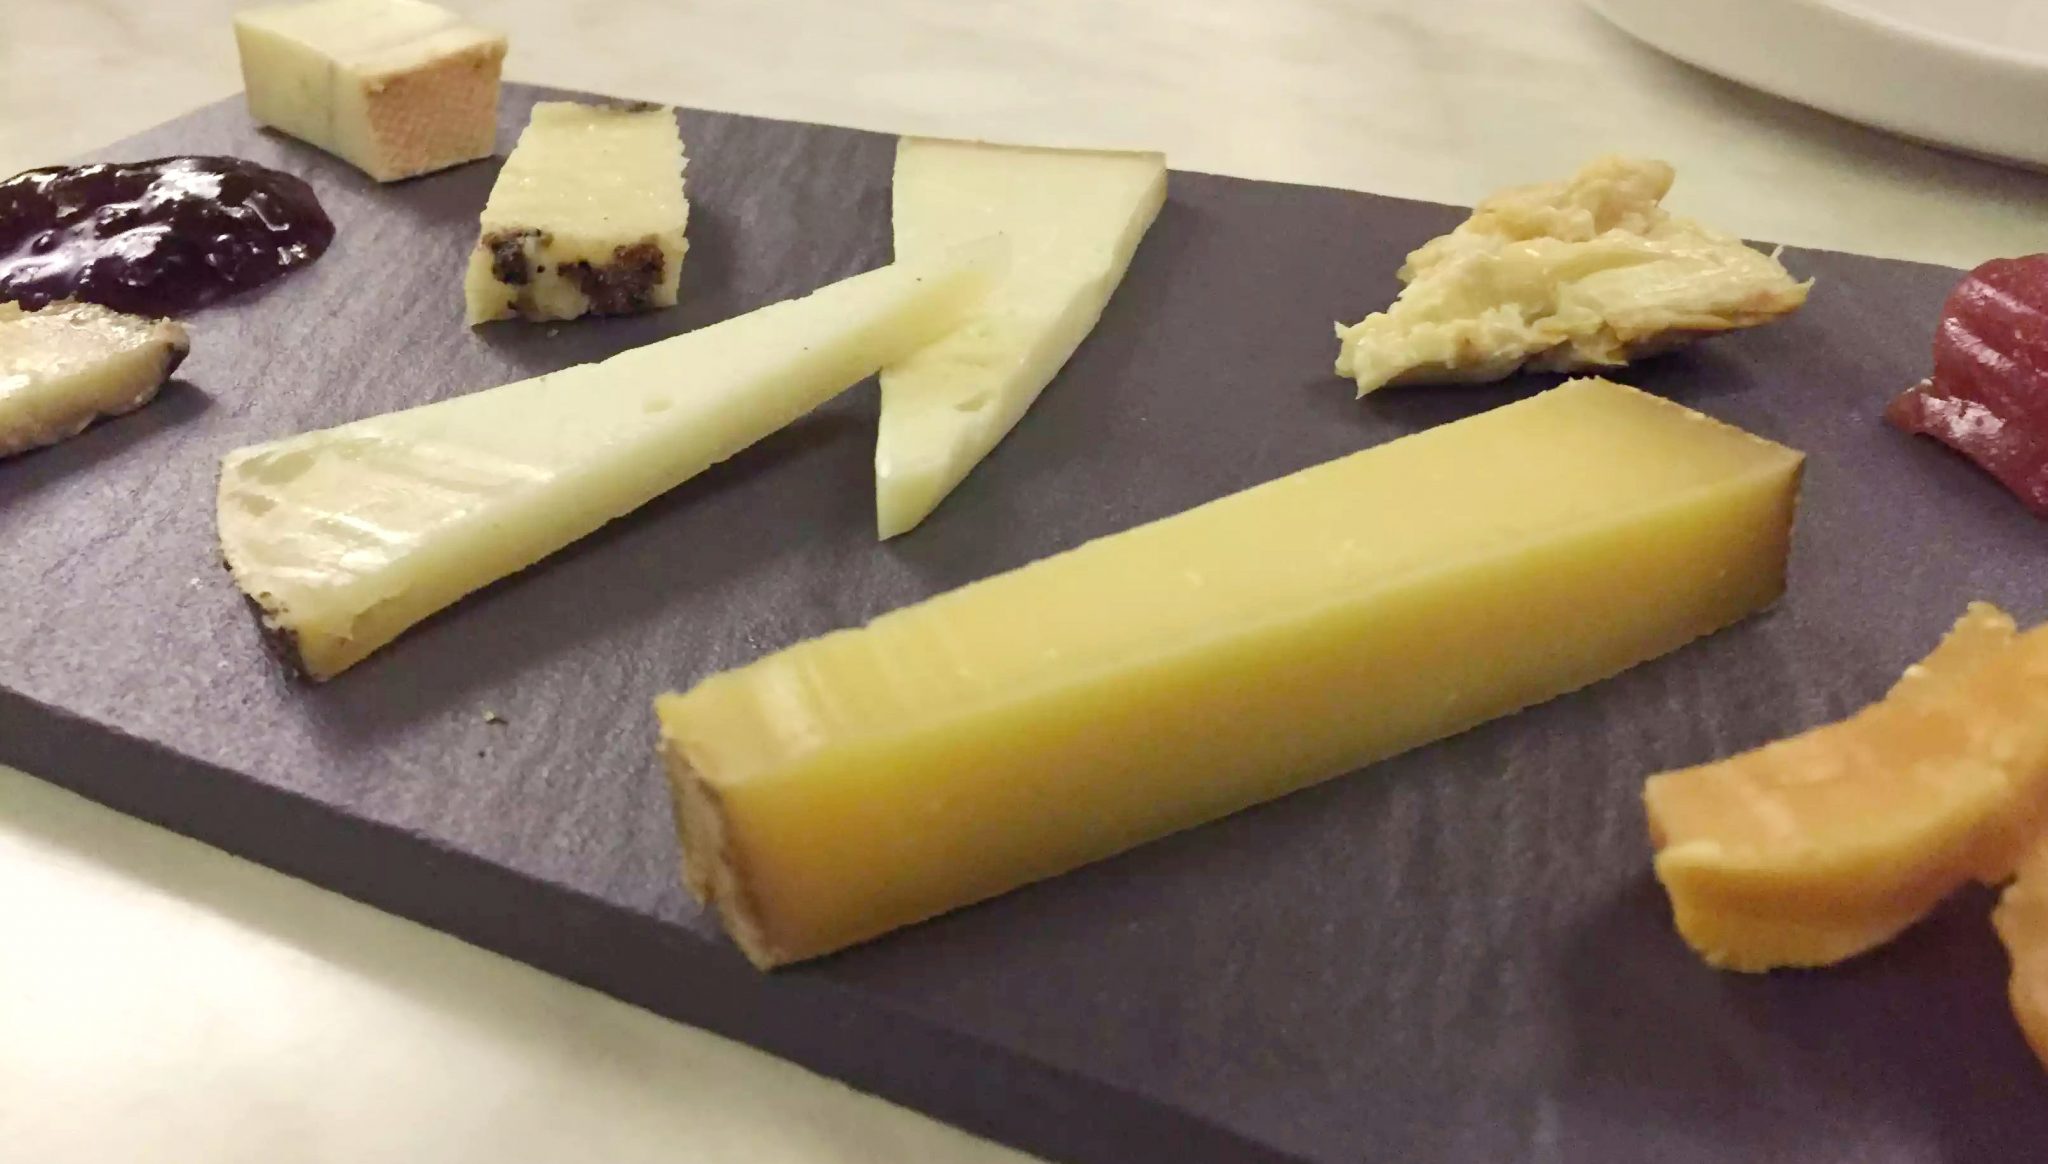 Enoteca MF Cadaques by Emma Eats & Explores - Restaurant Review - Tapas - Catalonia - Spain - Selection of Cheese